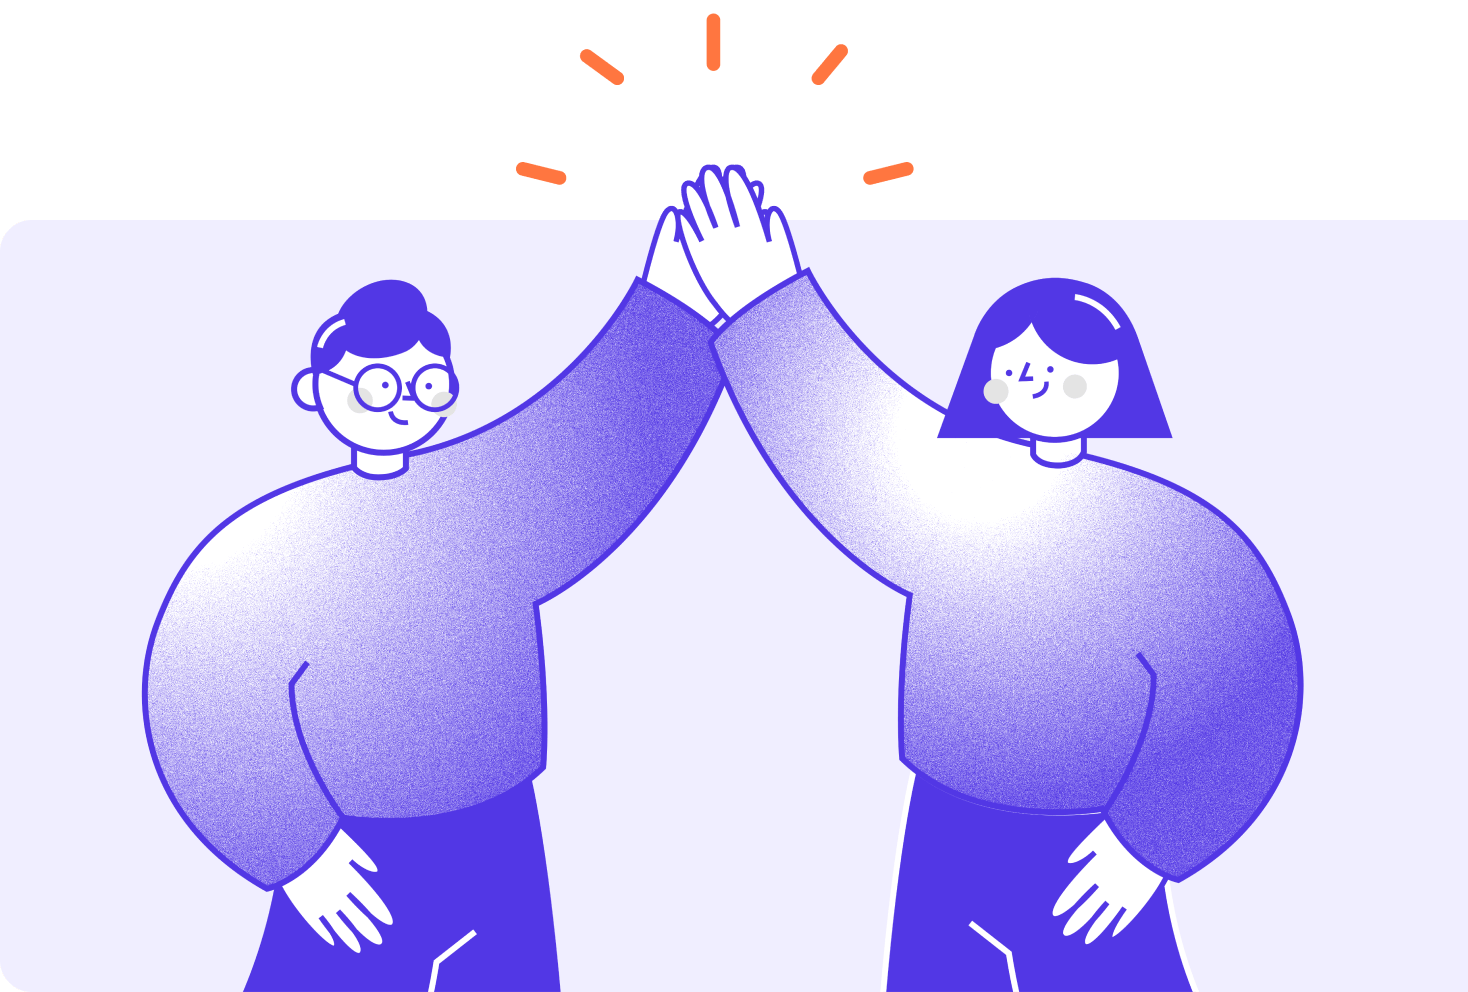 Empower your team illustration - two people high five